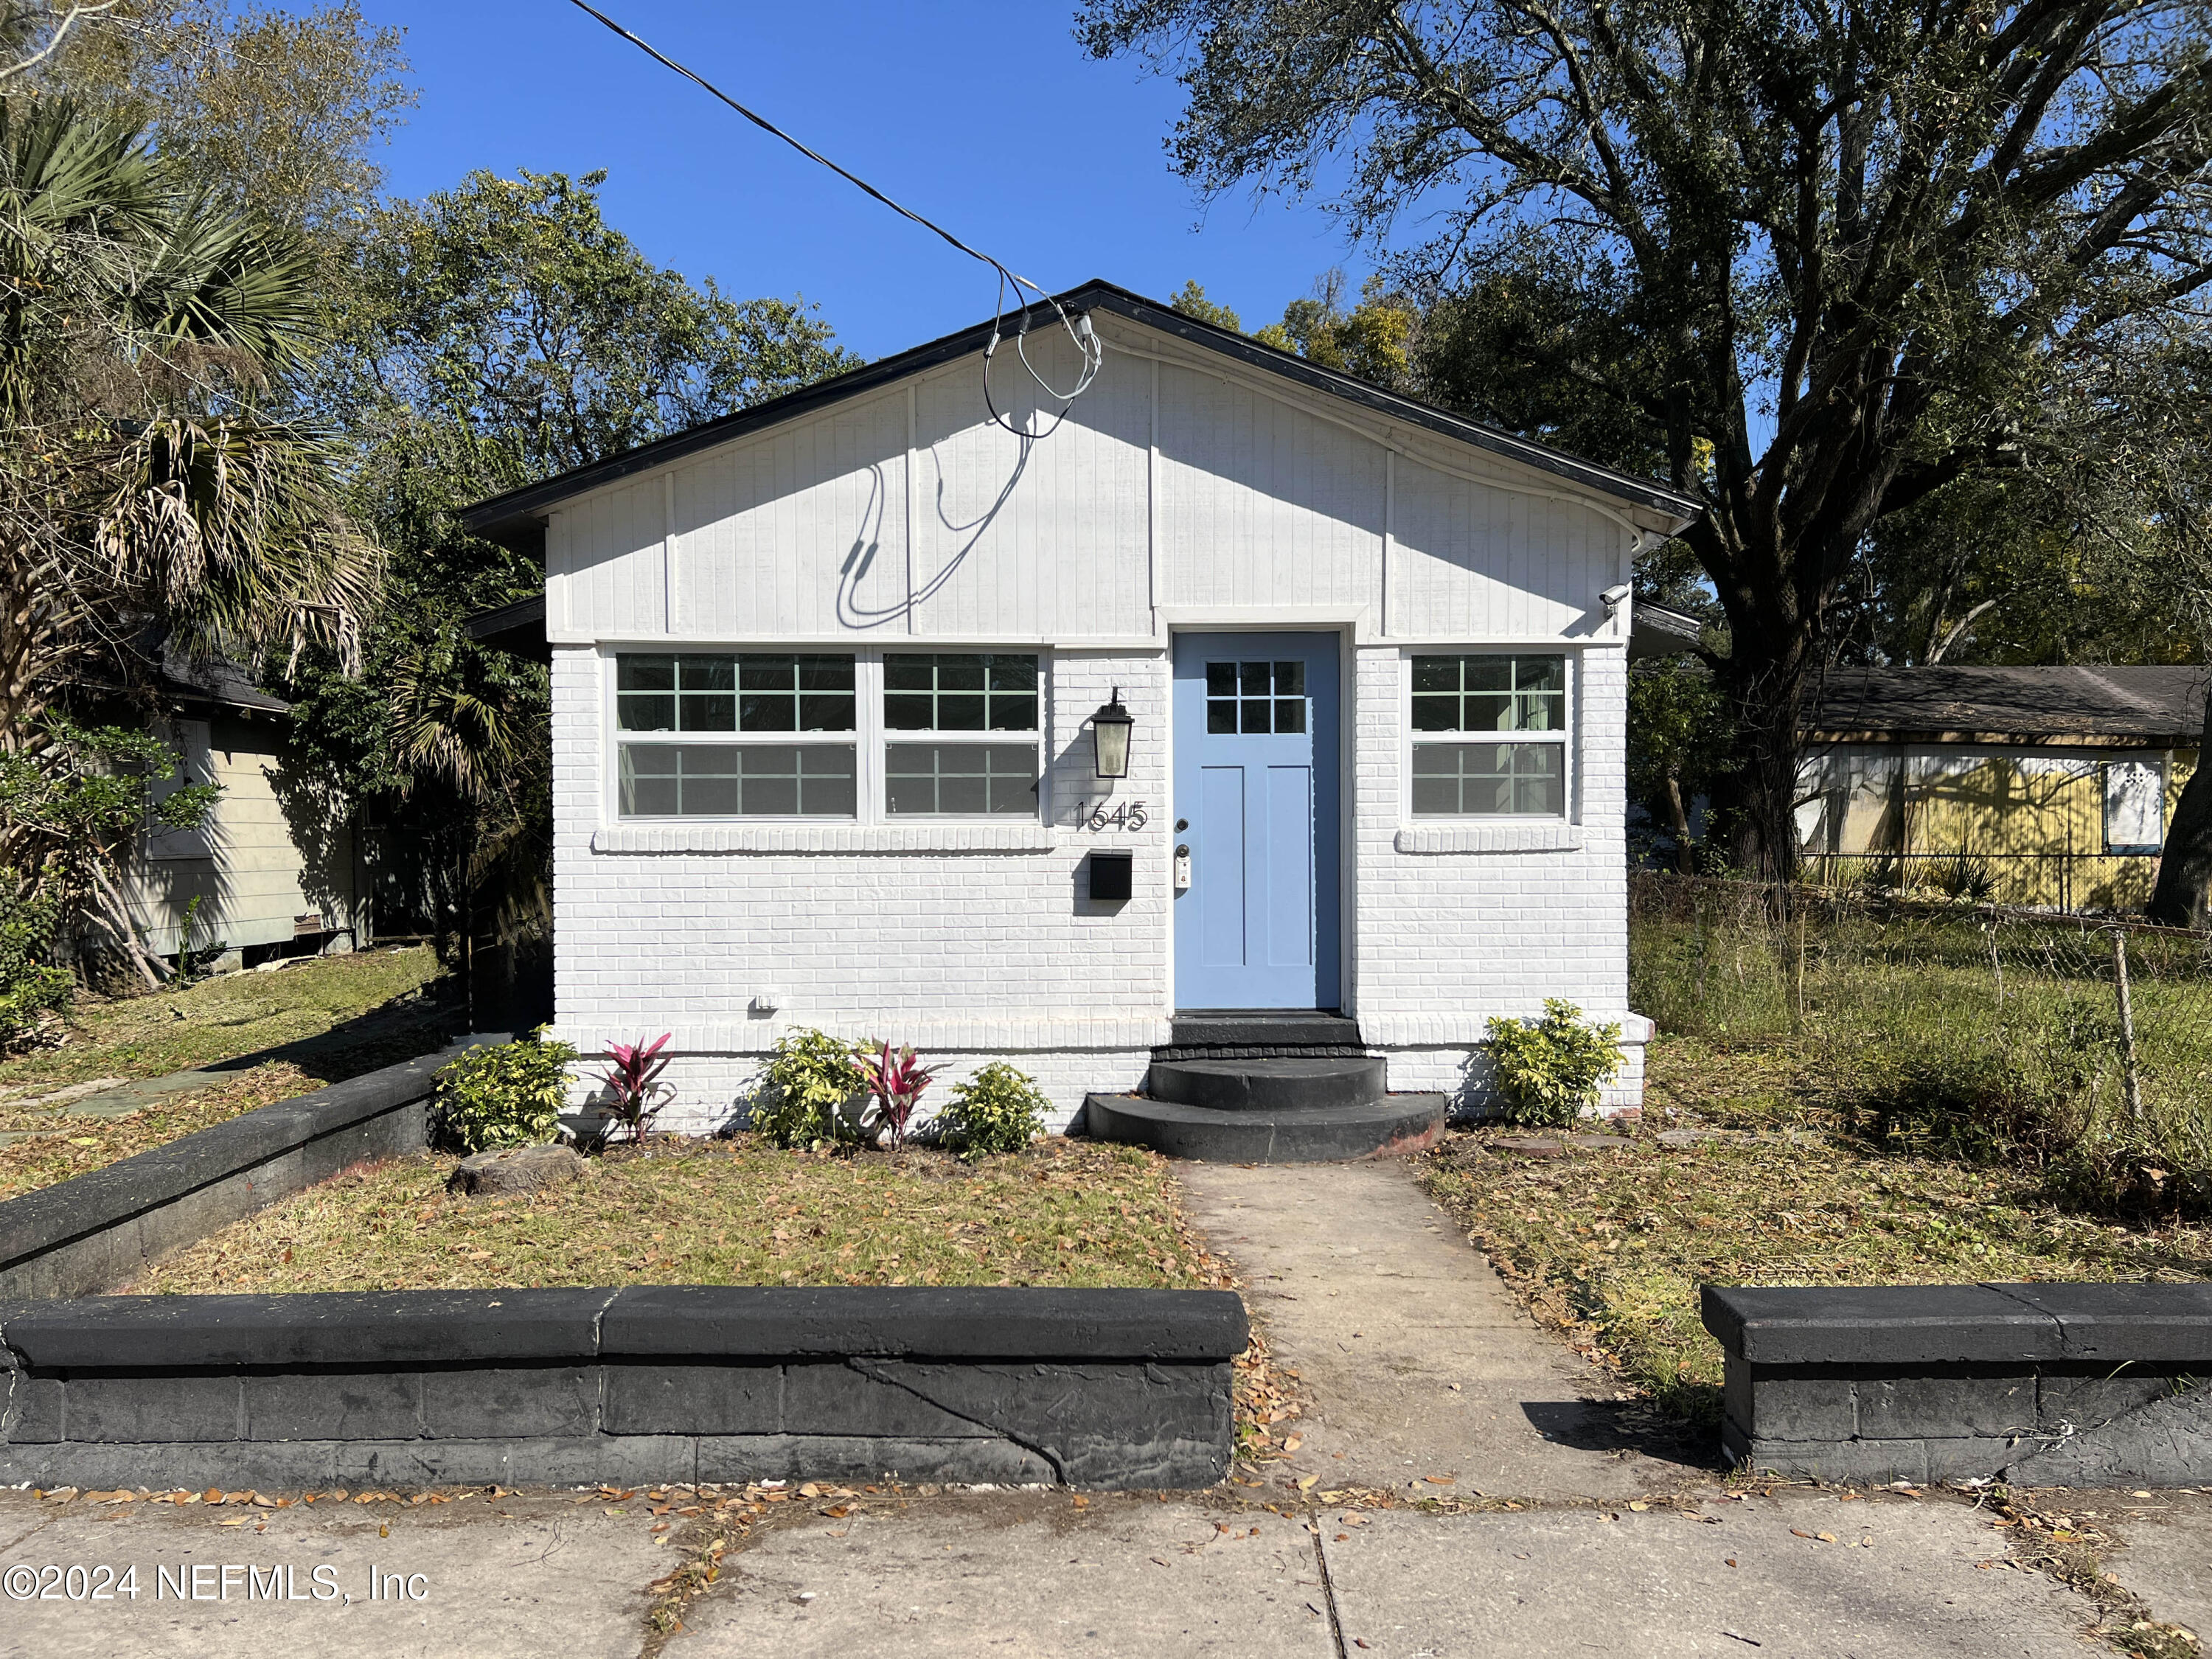 Jacksonville, FL home for sale located at 1645 W 4TH Street, Jacksonville, FL 32209